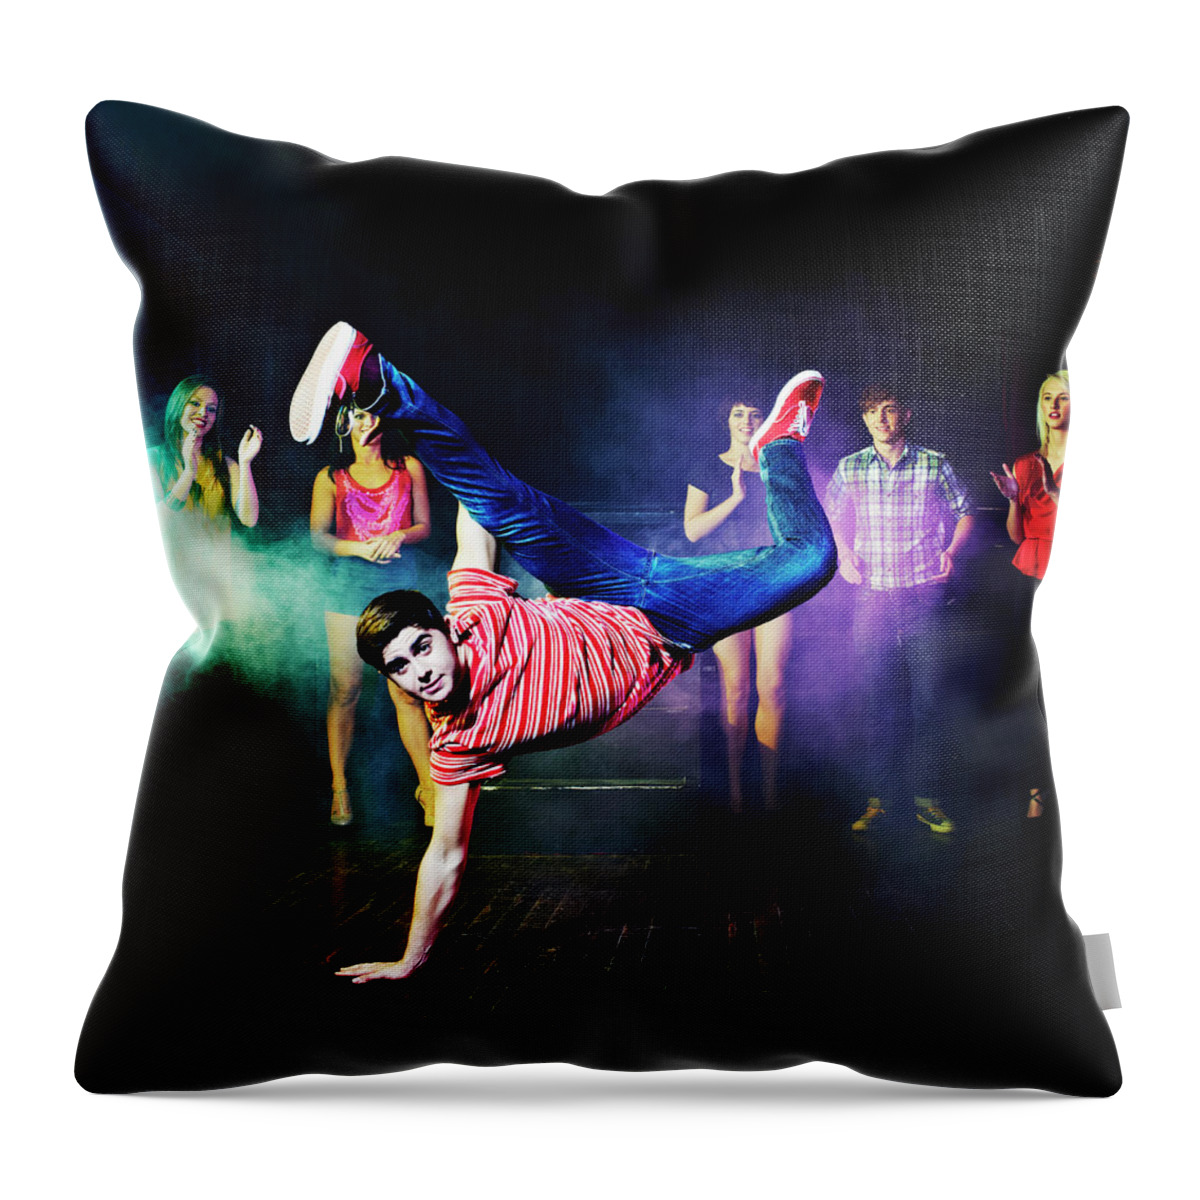 Young Men Throw Pillow featuring the photograph Man Dancing In Front Of A Crowd Of by Flashpop